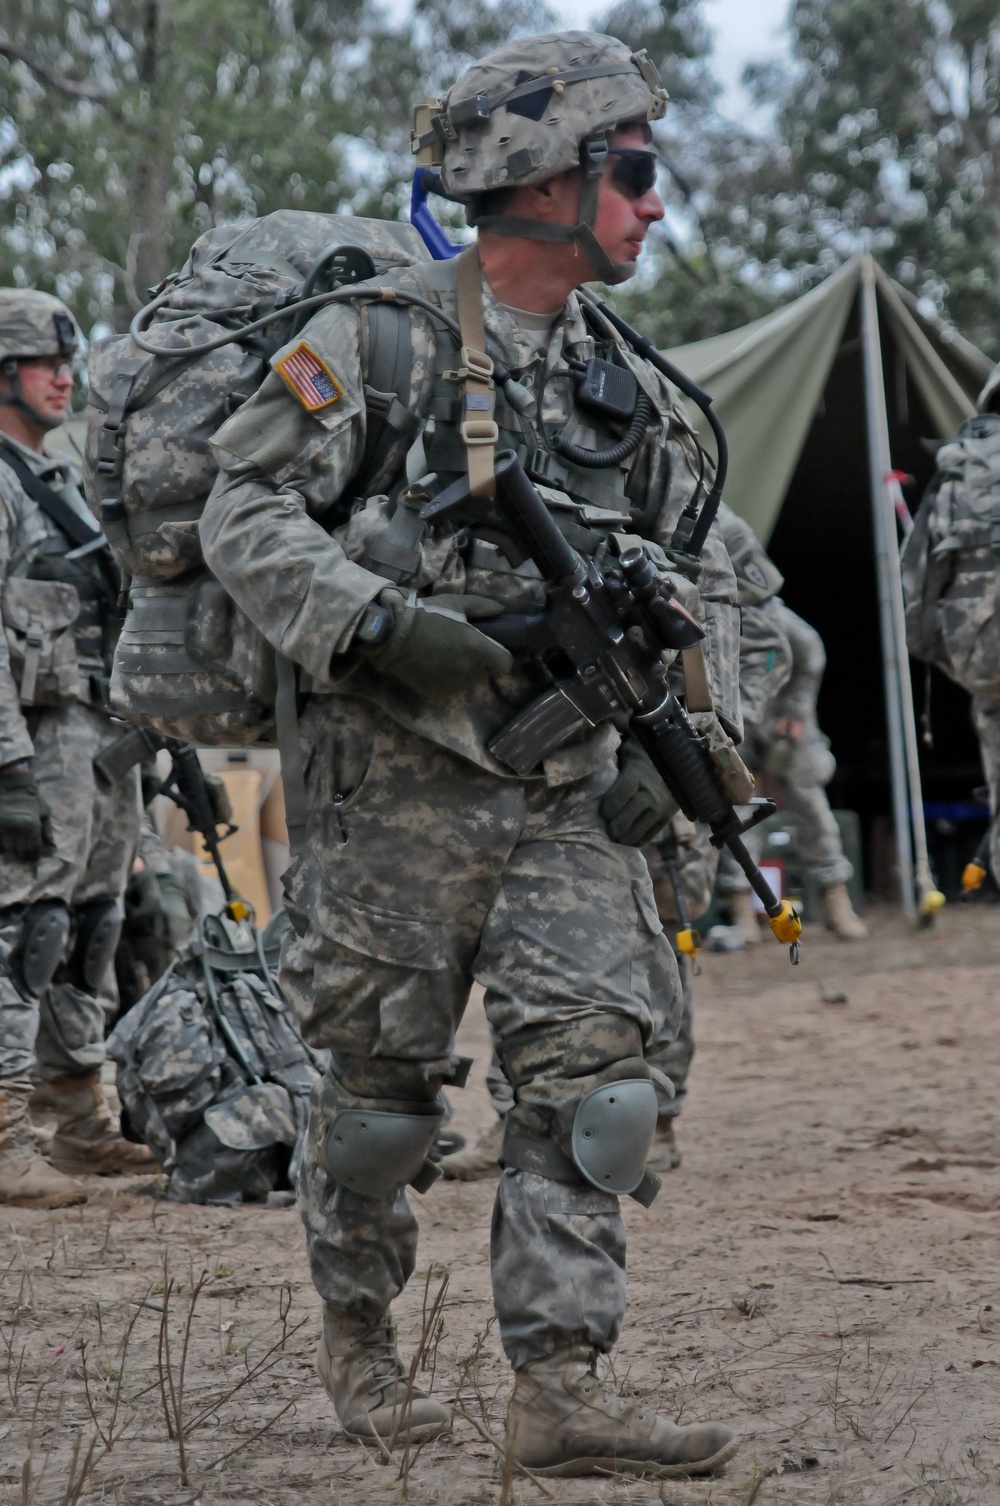 1-501 IN (A) paratrooper prepares to lead his unit